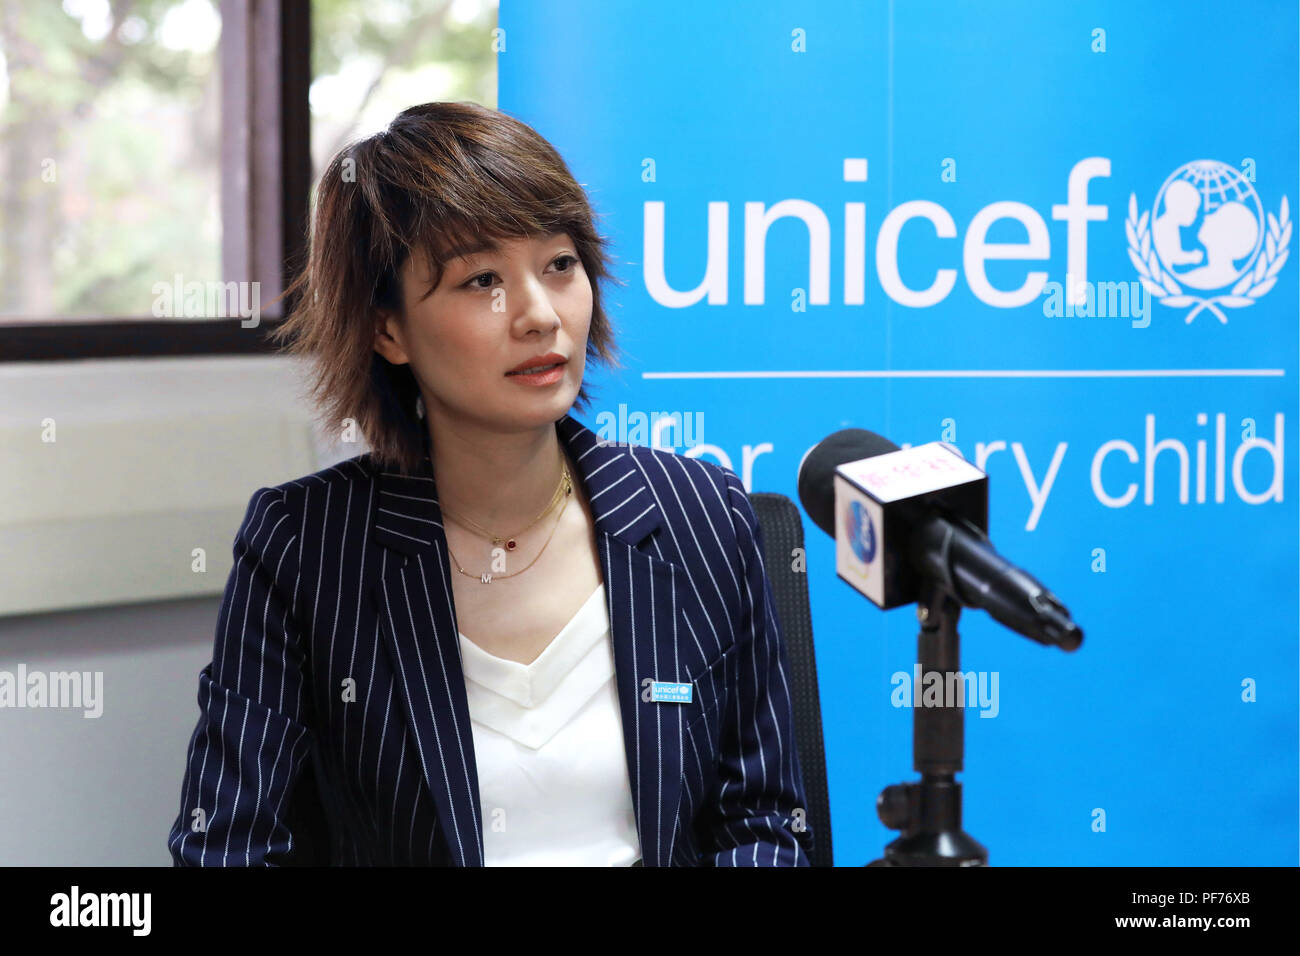 Nairobi, Kenya. 17th Aug, 2018. Ma Yili, the United Nations Children's Fund (UNICEF) ambassador, speaks during an interview at the United Nations Office at Nairobi, Kenya, on Aug. 17, 2018. The international community should forge a united front to secure a brighter and healthier future for all children, said Ma Yili during her recent trip in Kenya. Credit: Wang Teng/Xinhua/Alamy Live News Stock Photo